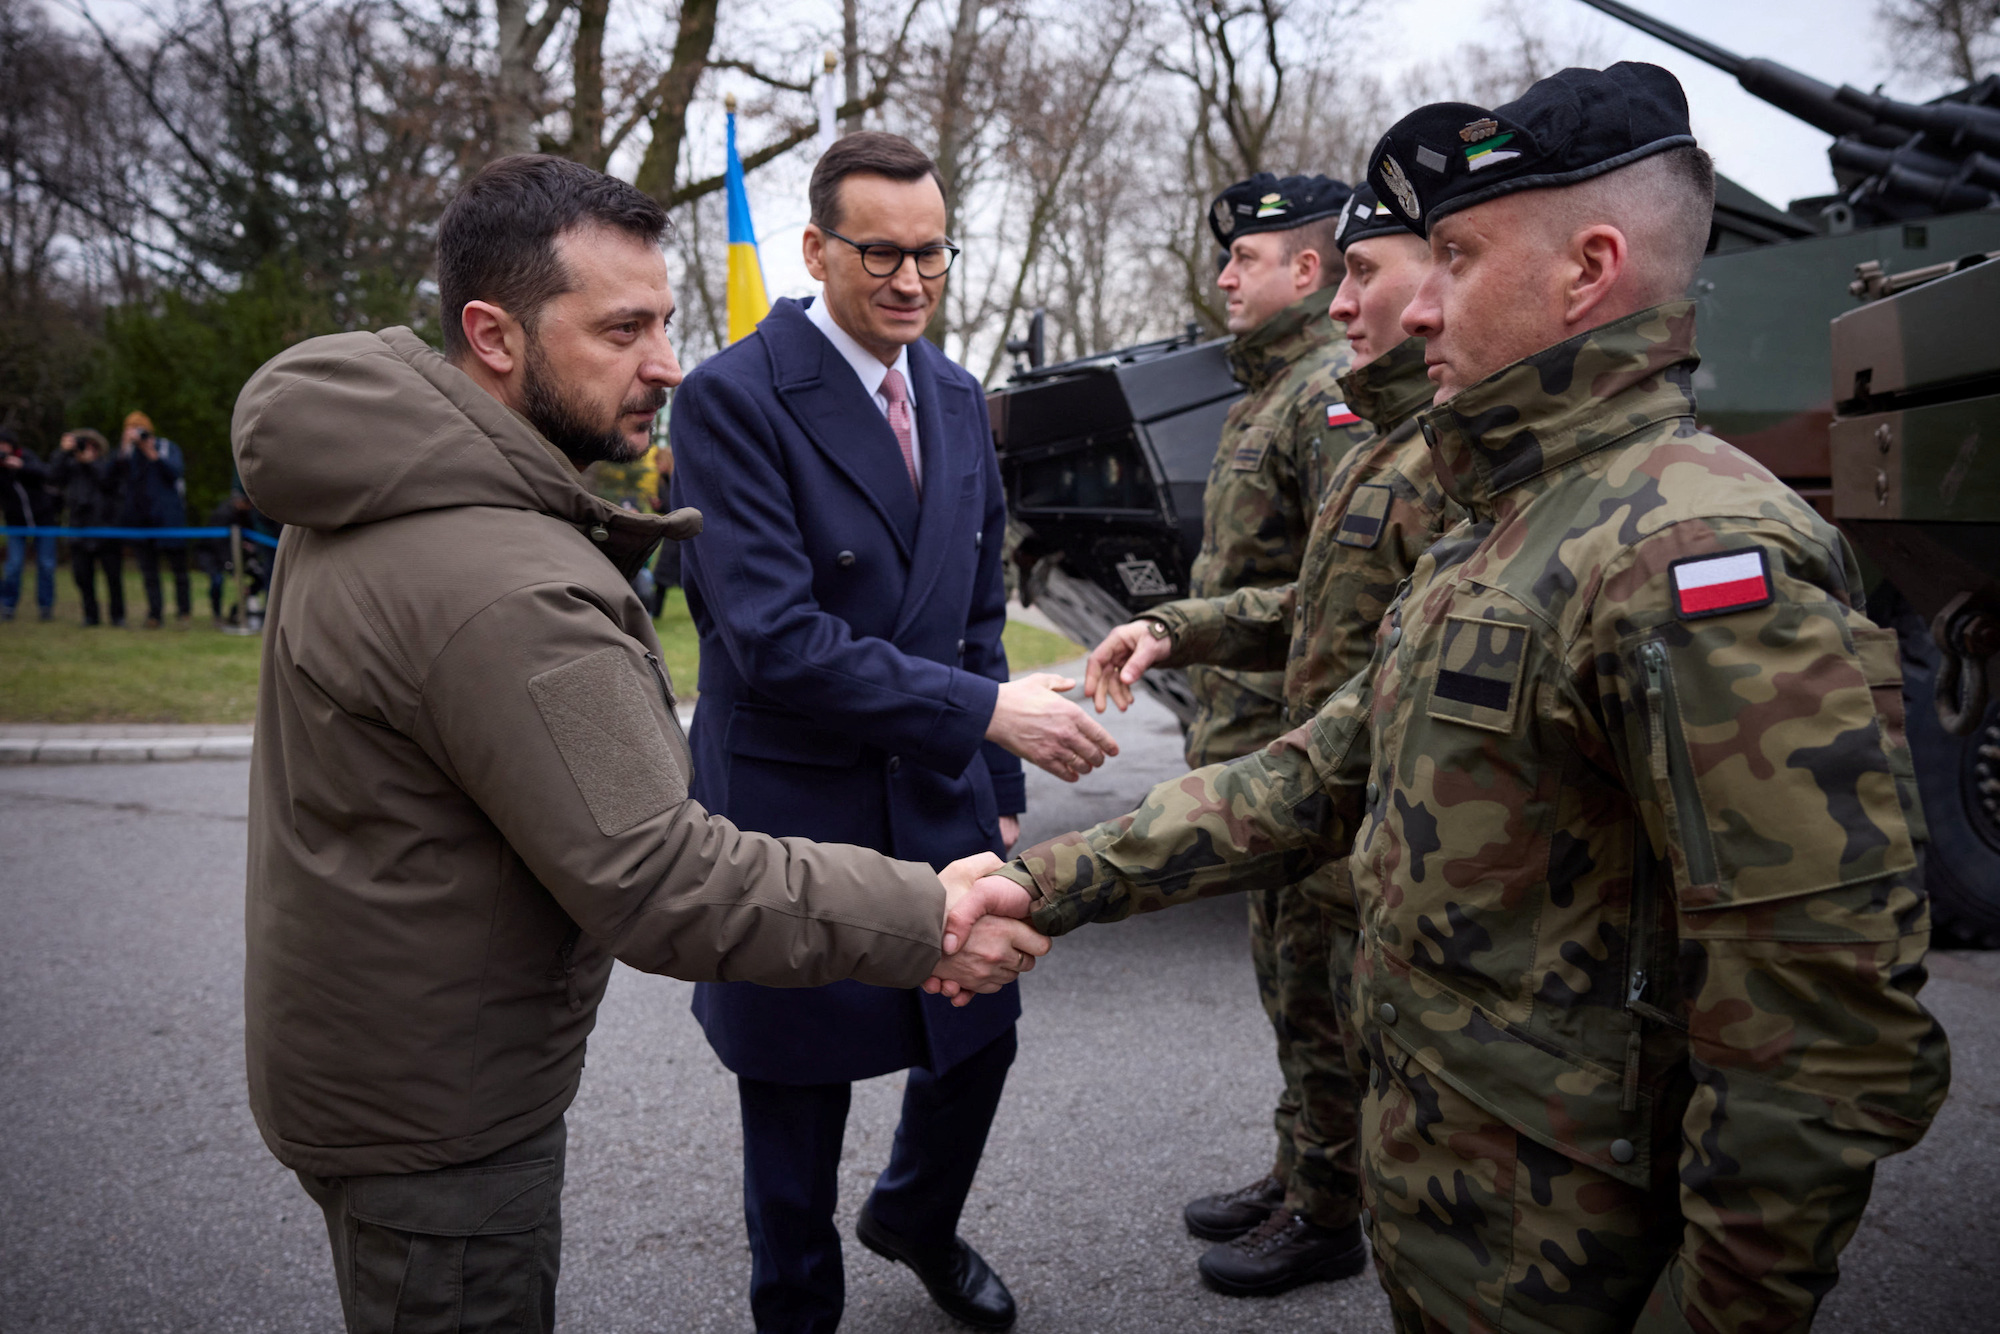 Zelensky and Polish Prime Minister Mateusz Morawiecki shake hands with Polish service members in Warsaw on Wednesday.